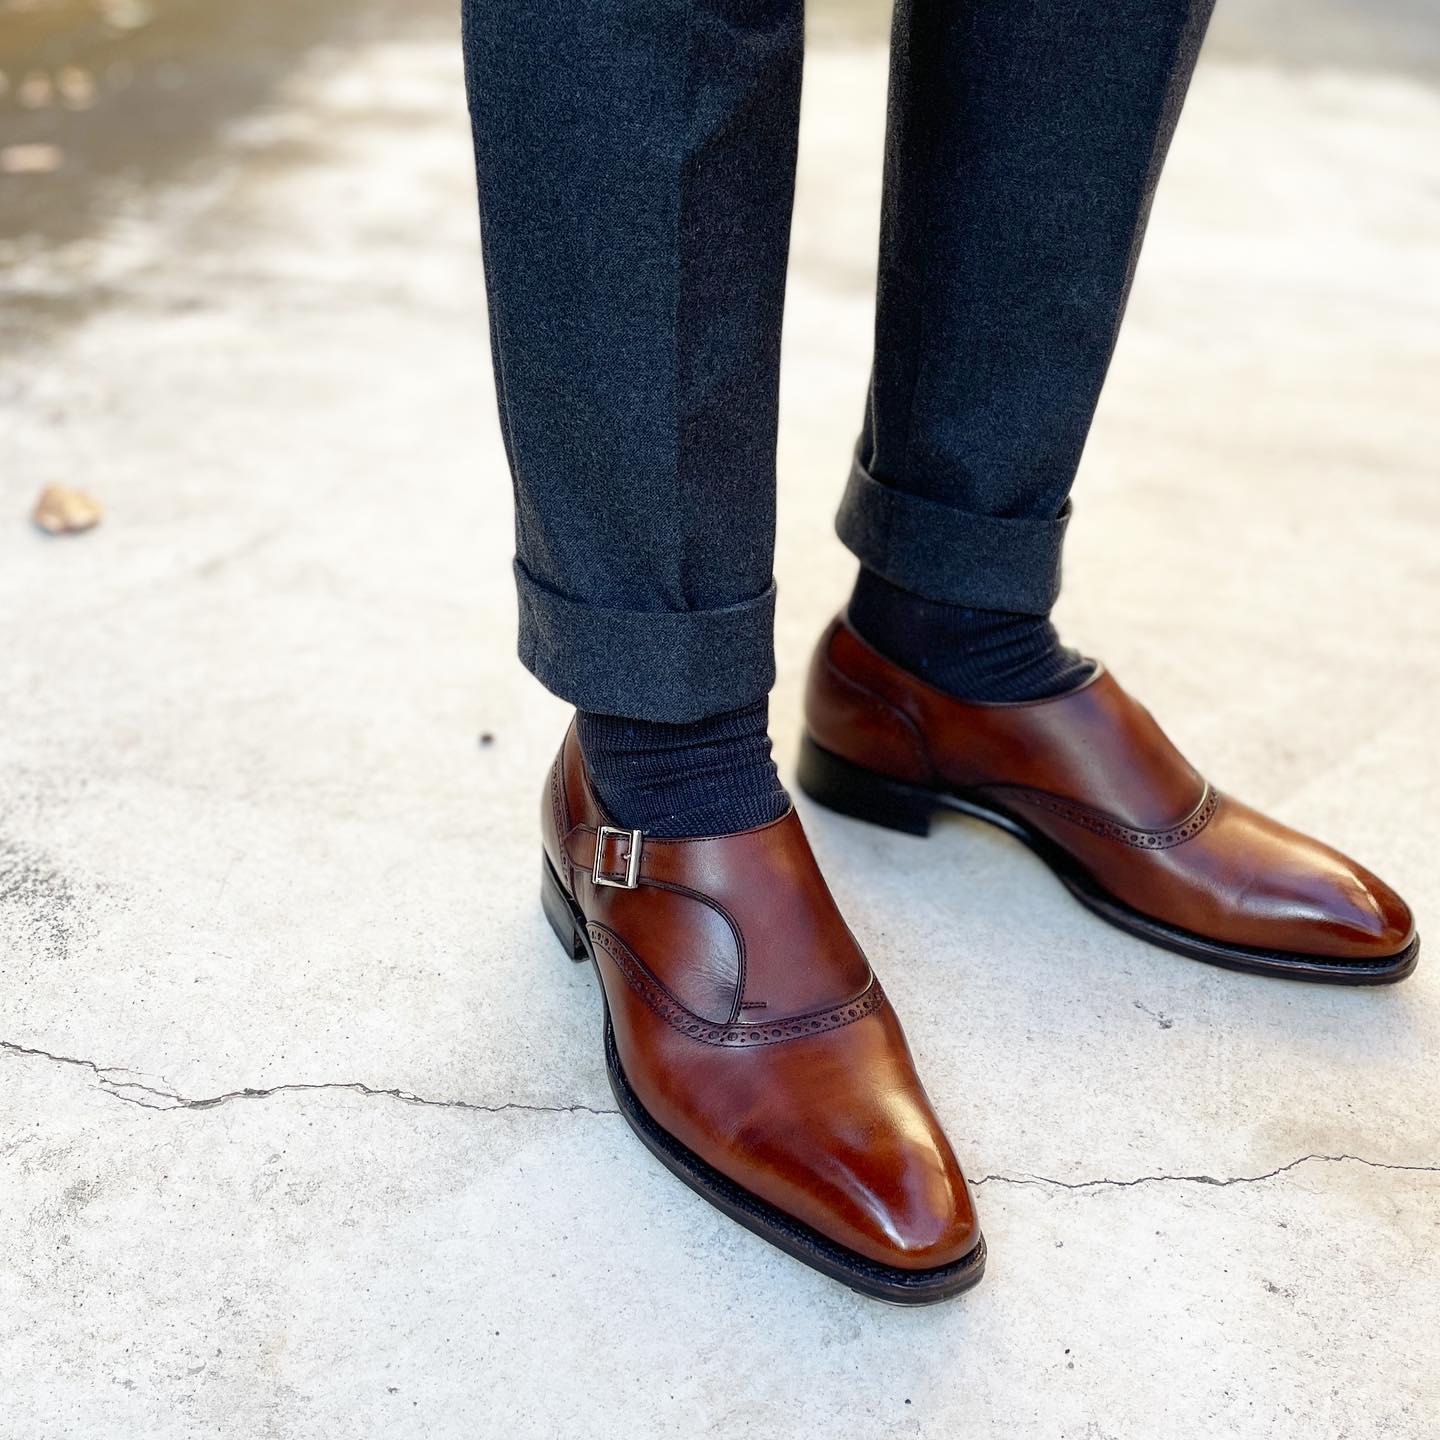 The Monk Strap